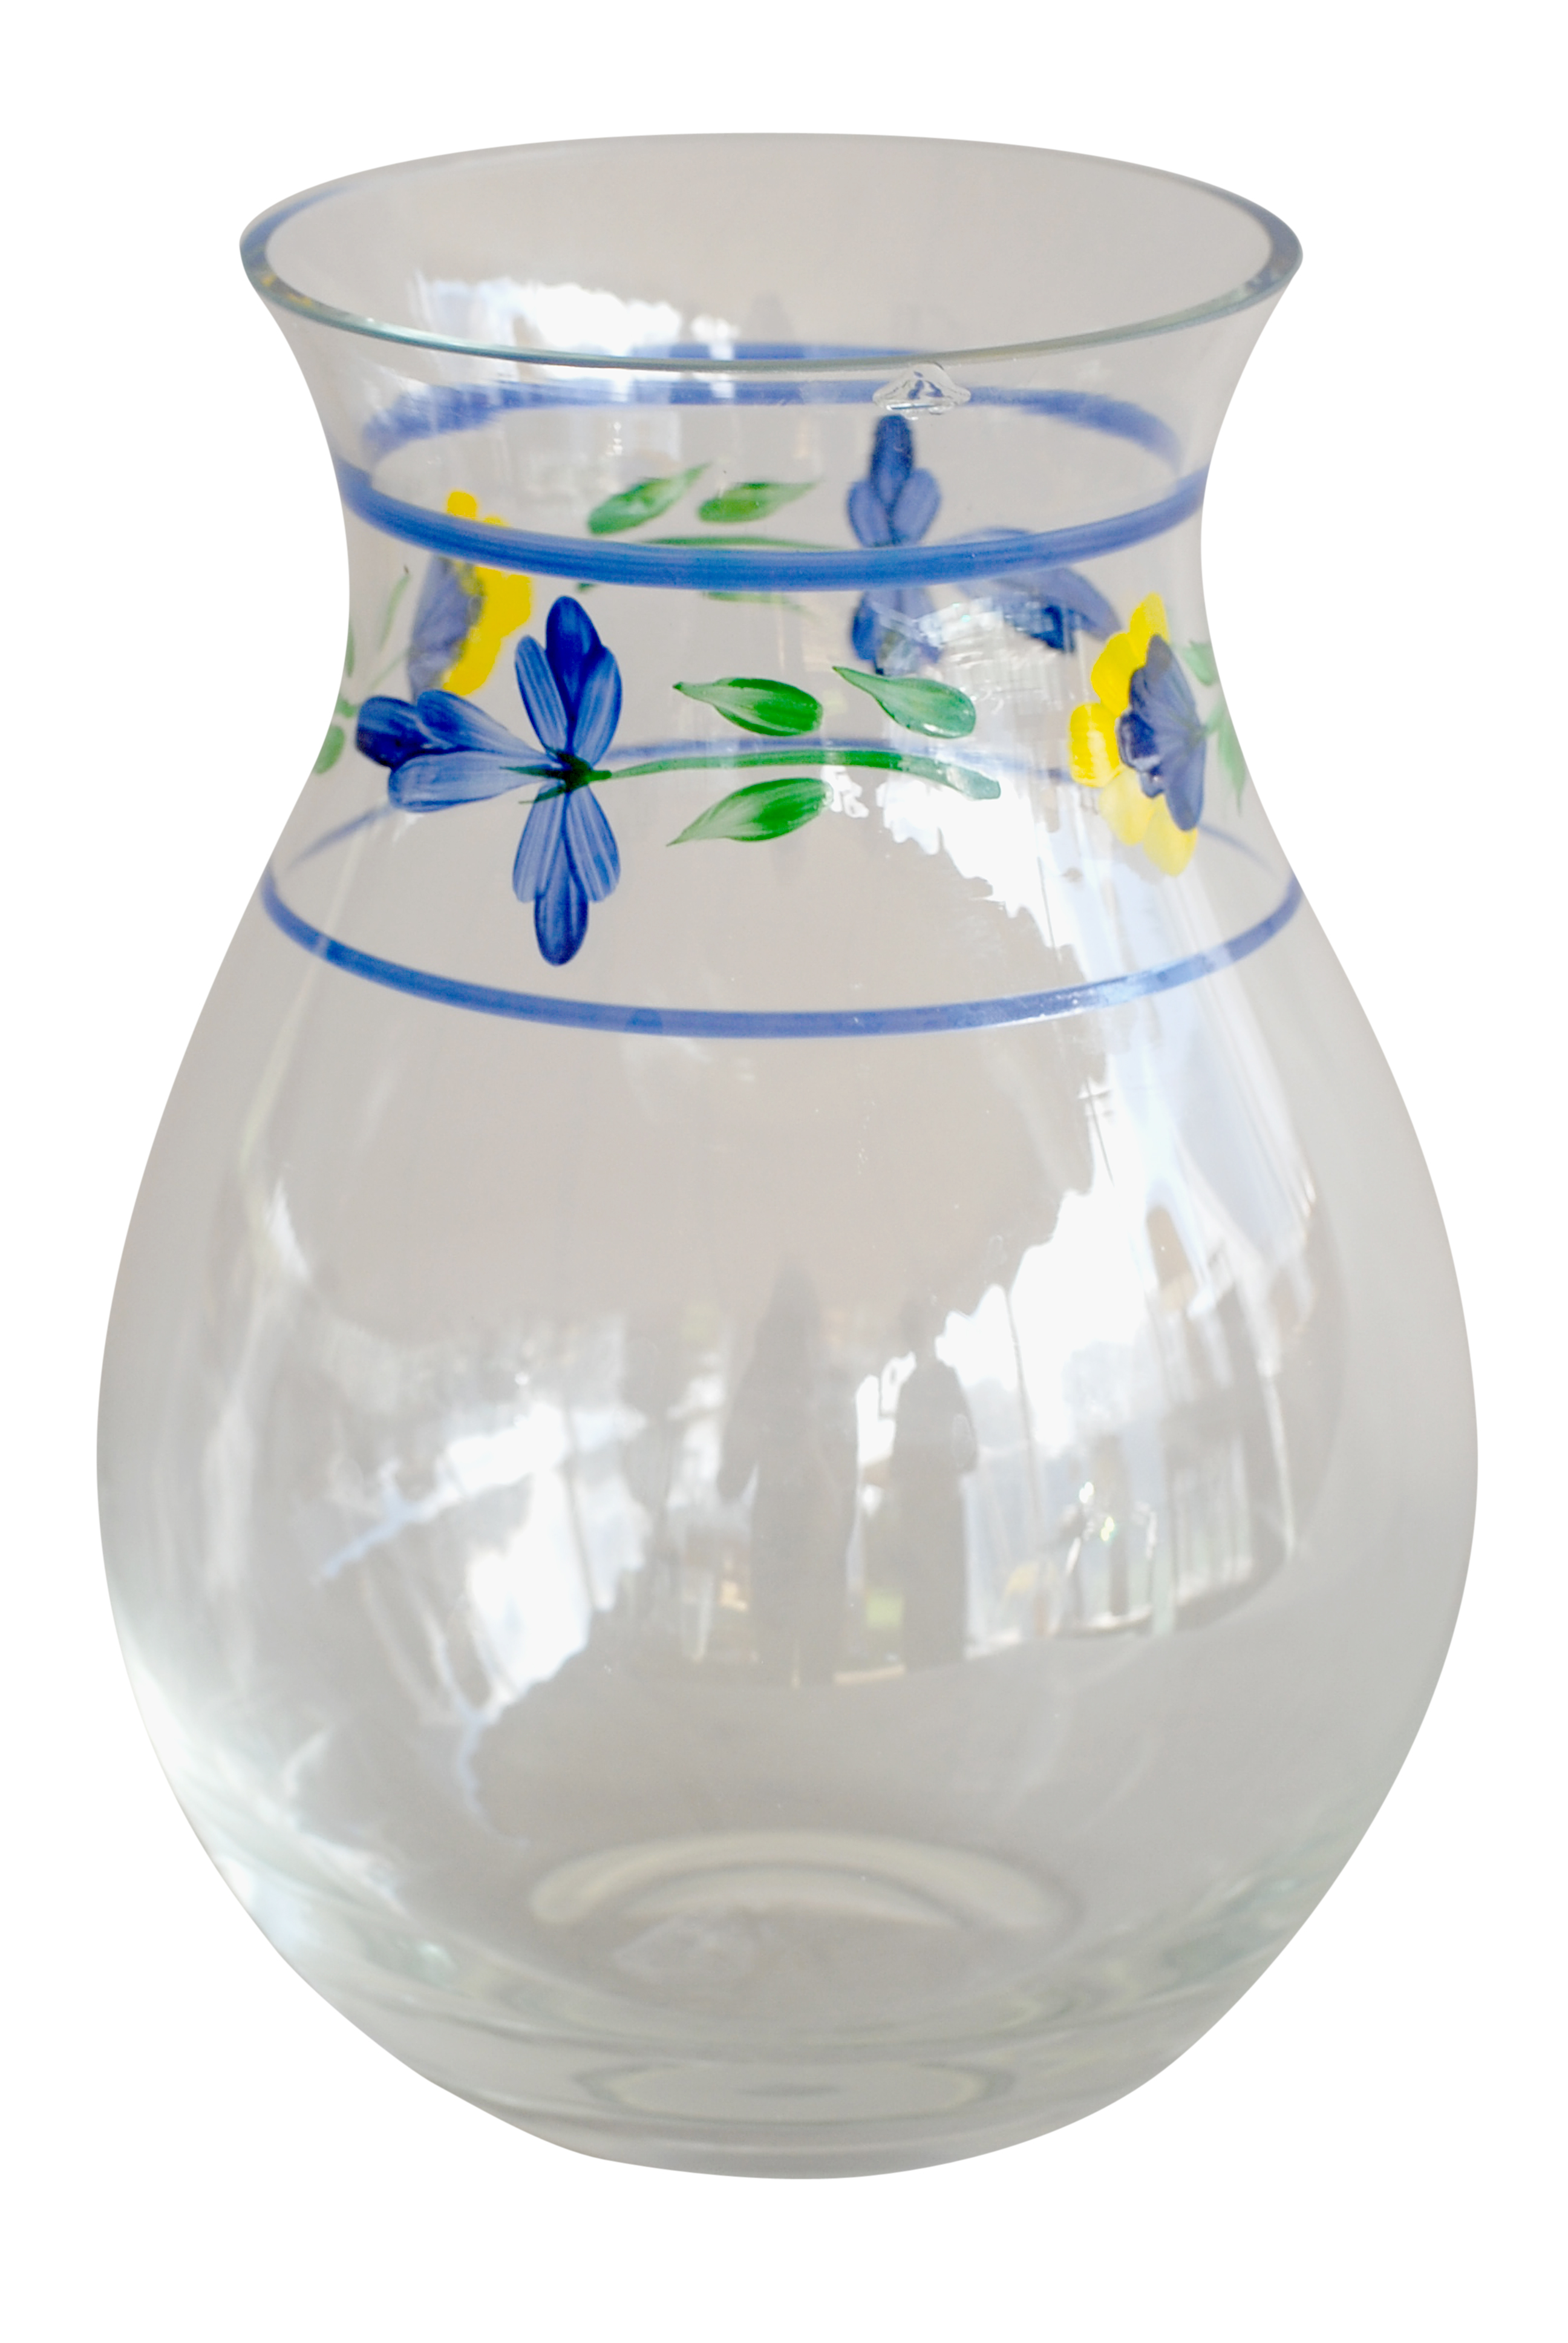 07 Hand painted glass vase w-floral design chipped blue-green-yellow